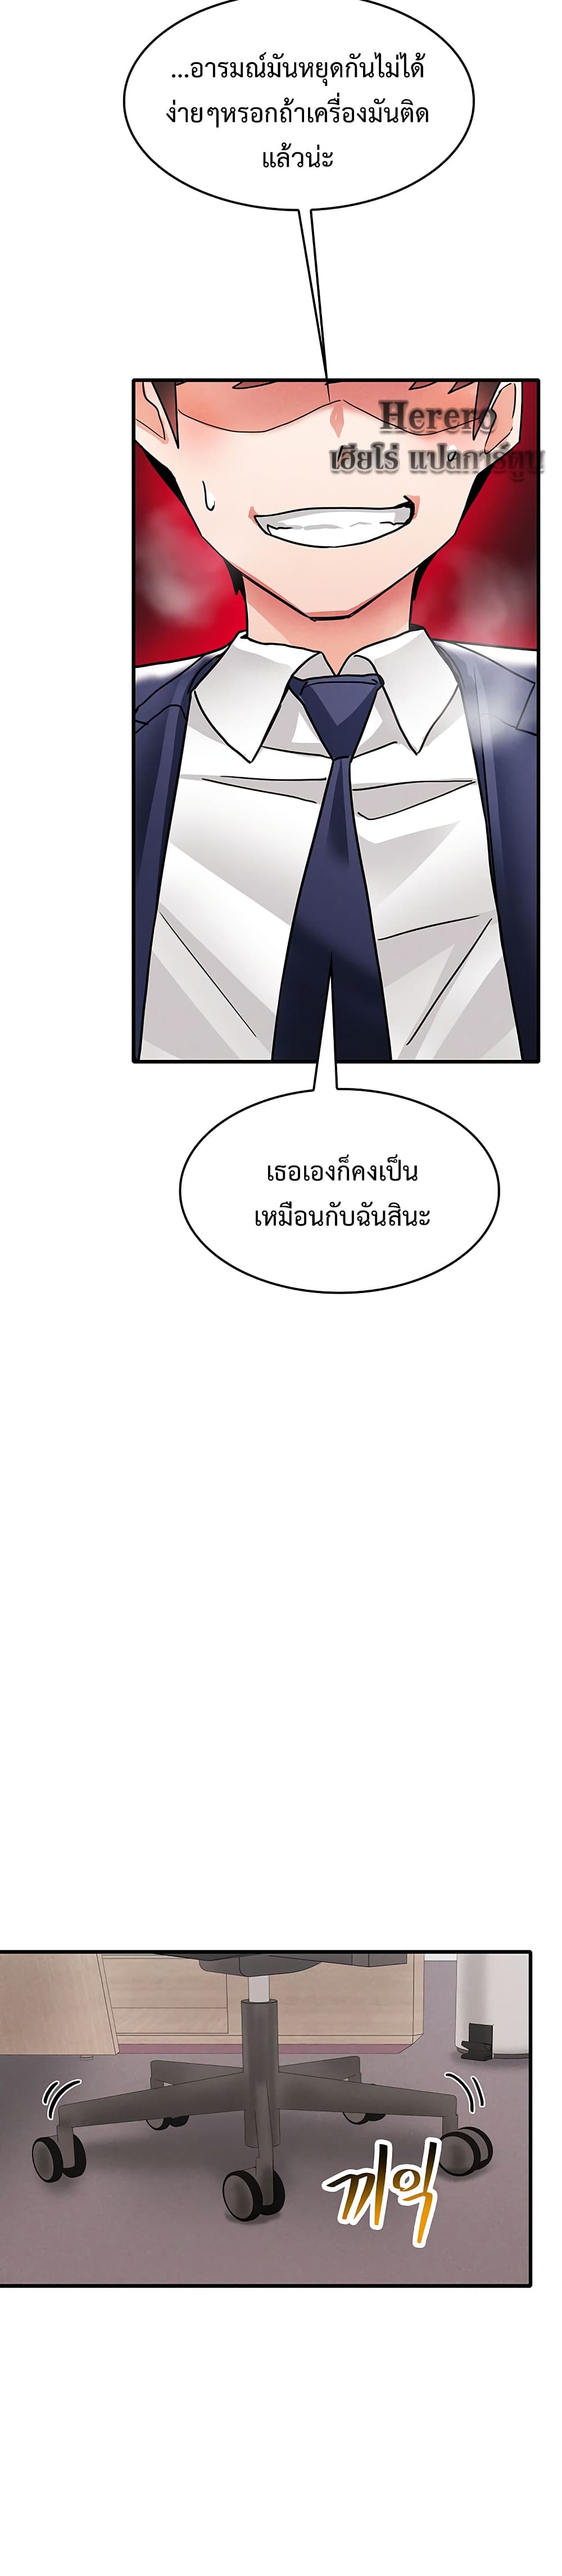 Relationship Reverse Button: Let’s Make Her Submissive 5 ภาพที่ 9